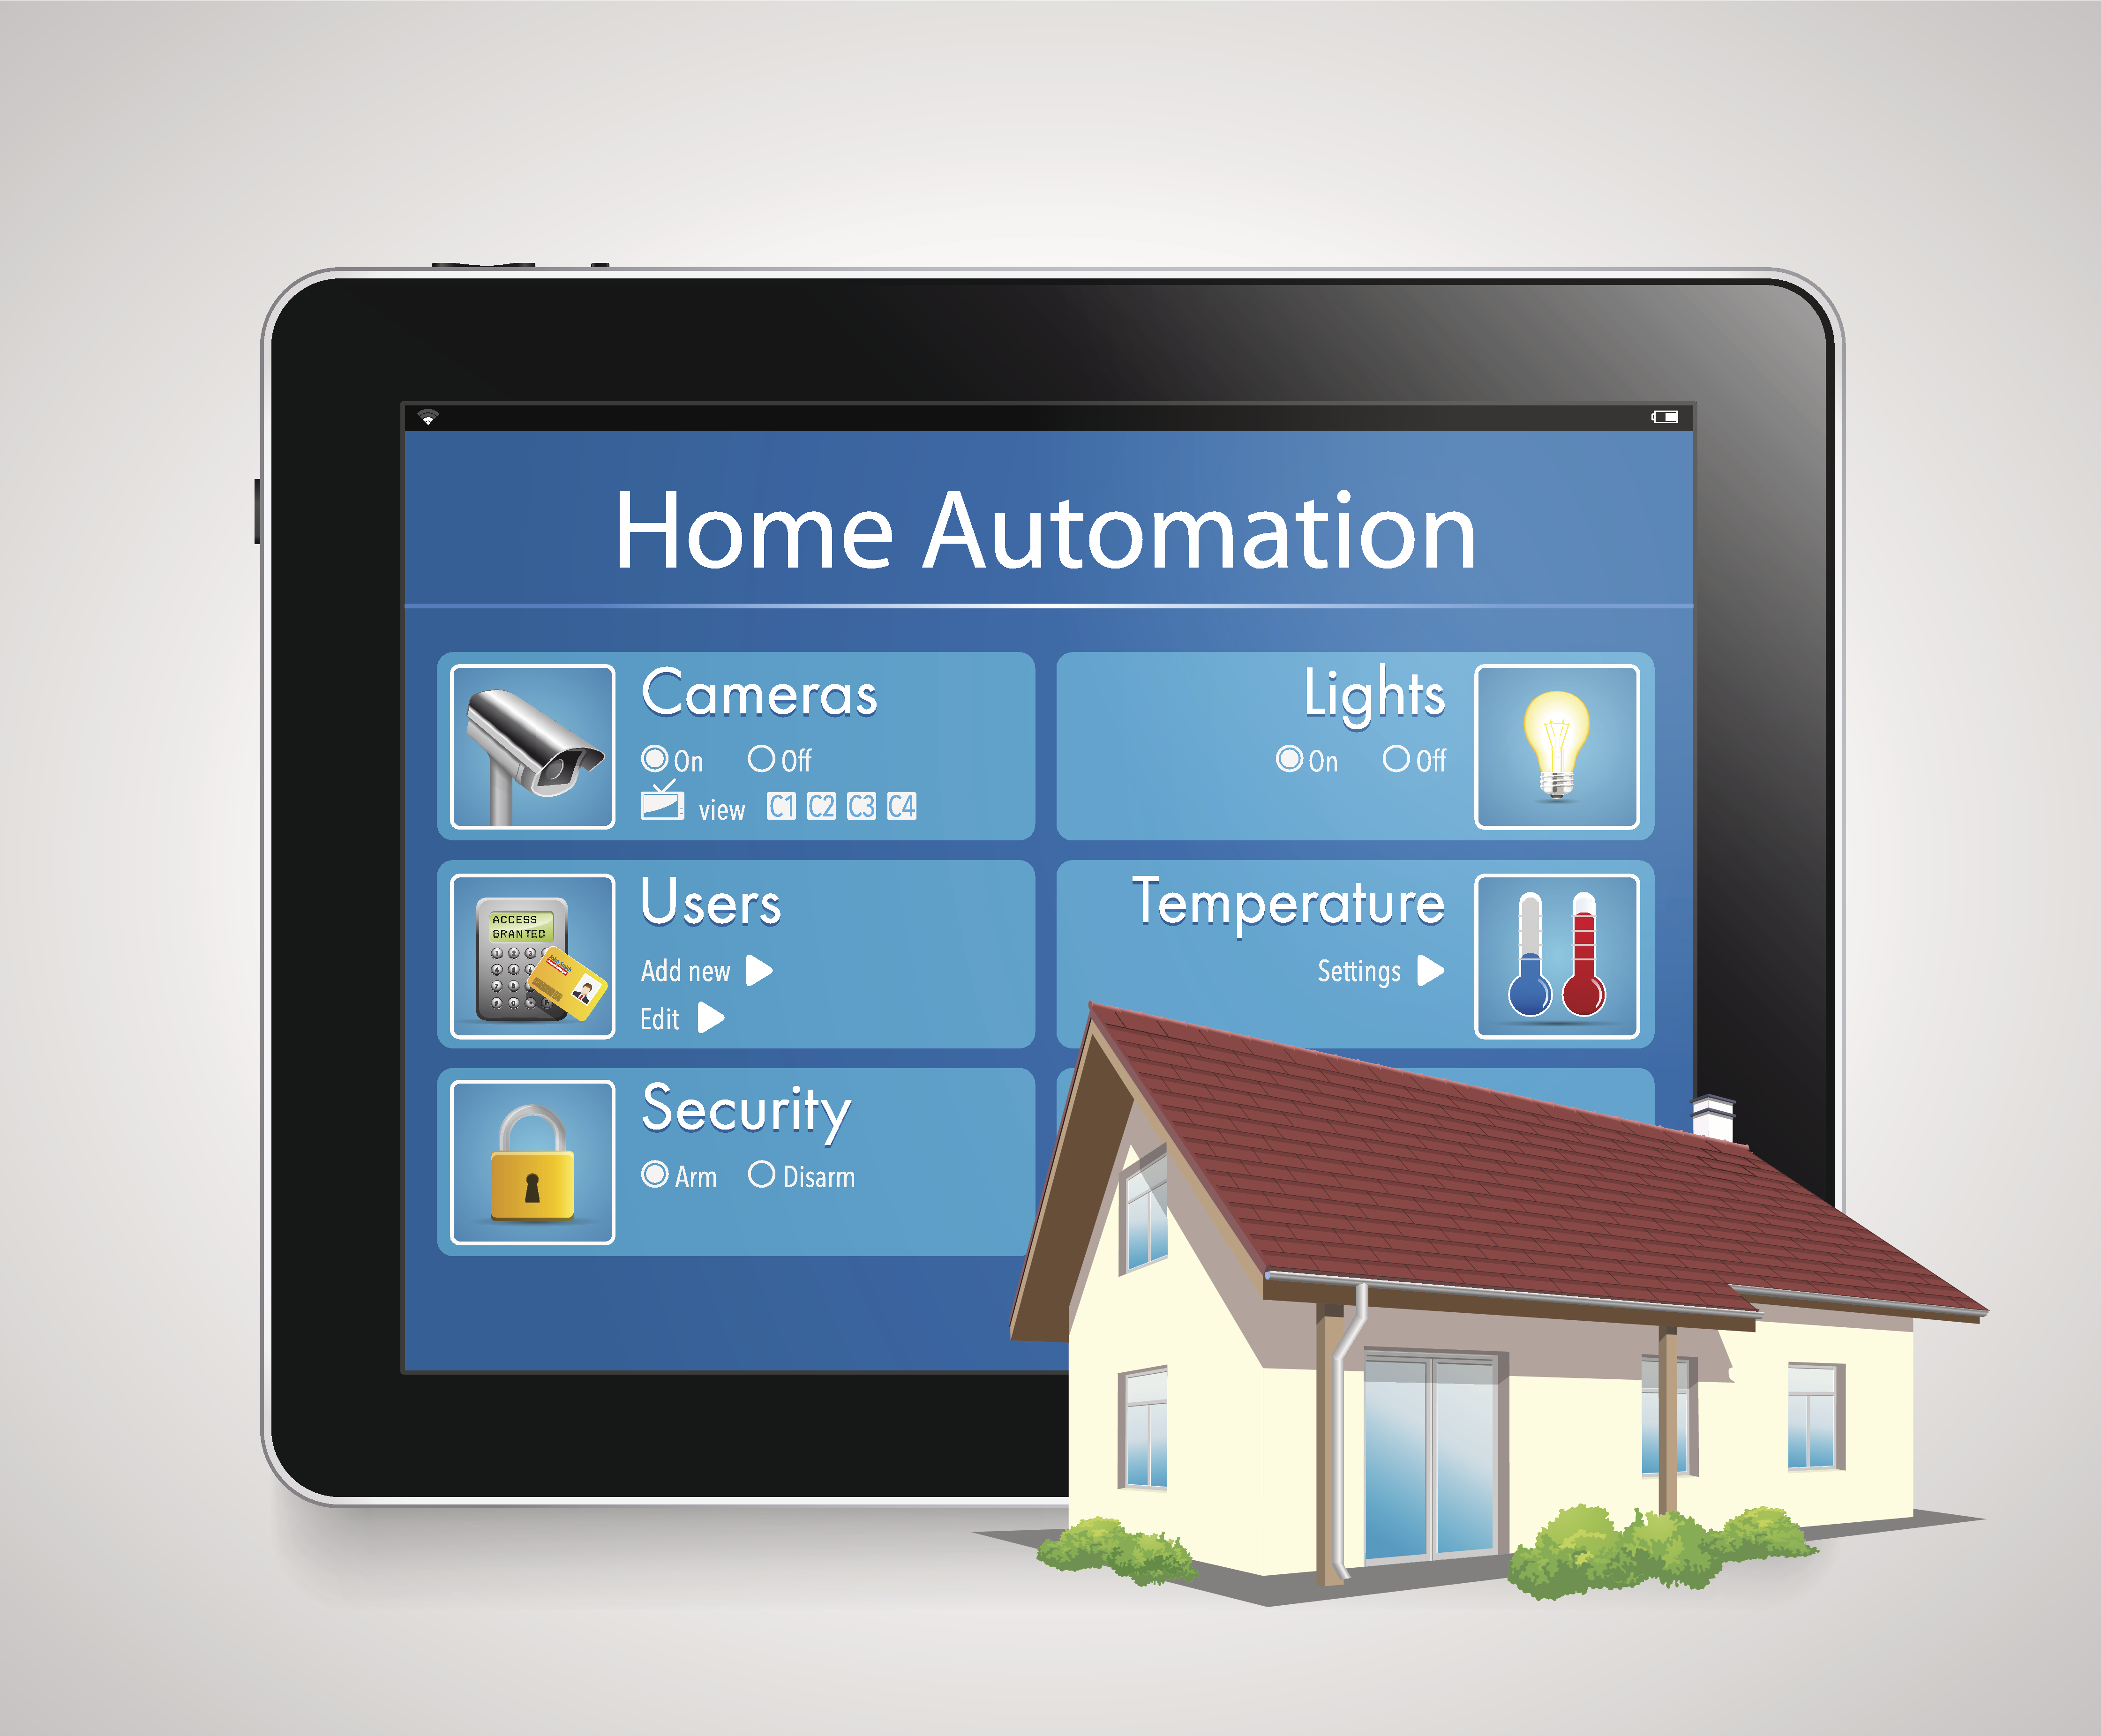 Steps on How to Pick a Home Automation System Smart Home Automation